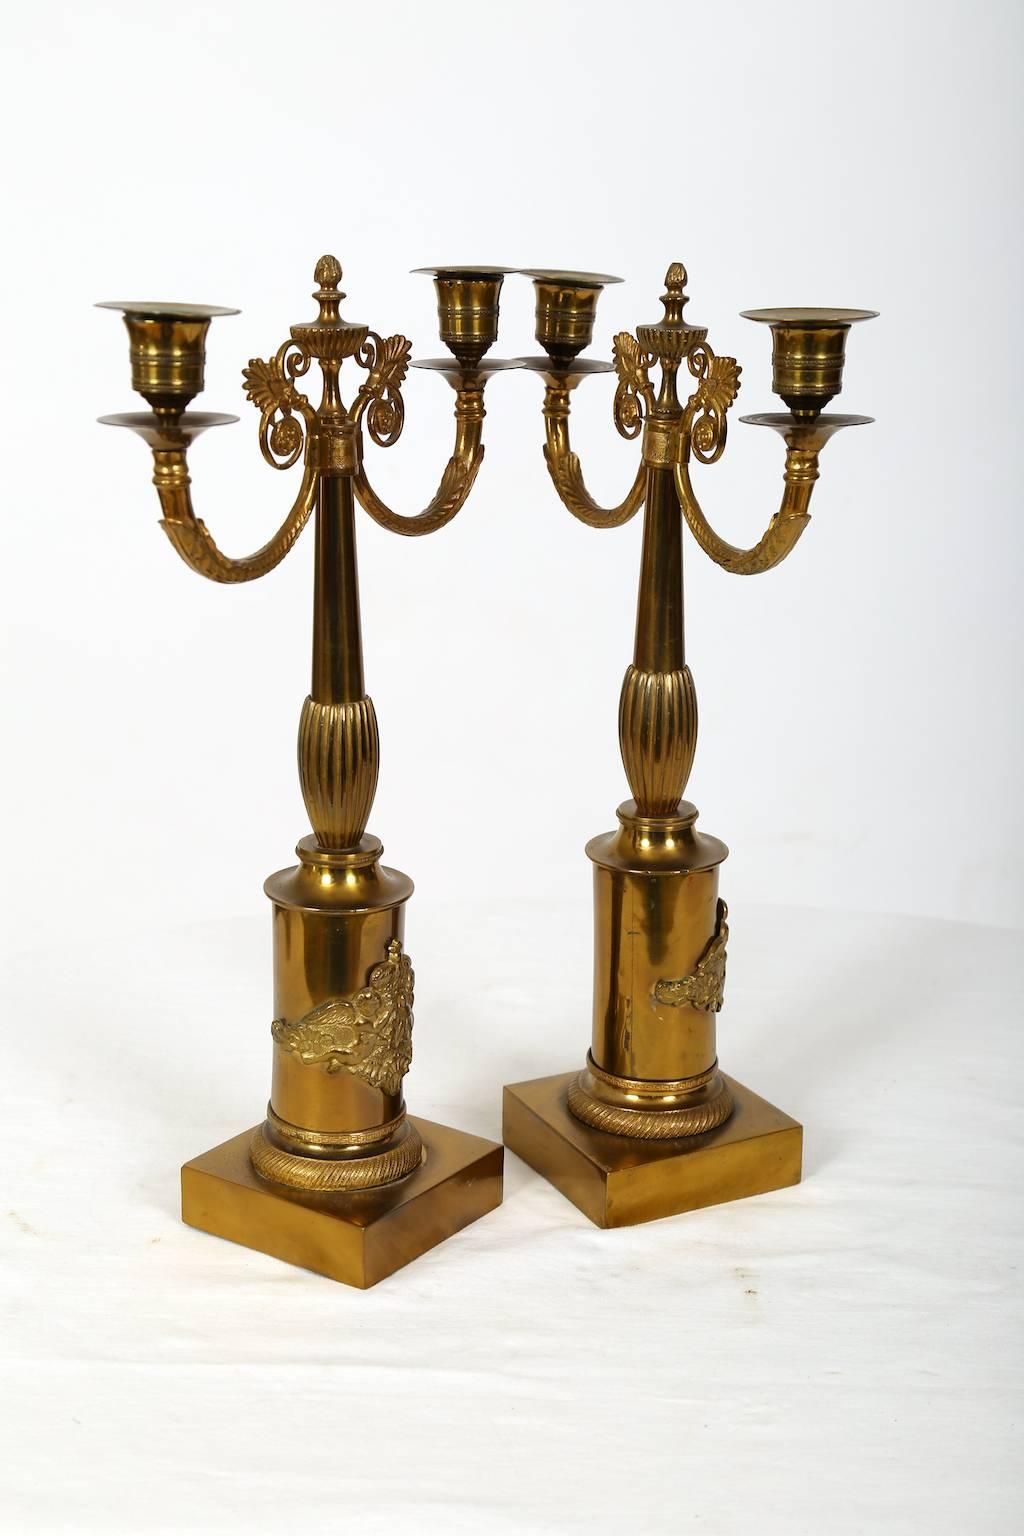 This elegant pair of gilded brass candelabras are most likely from Sweden.
The are very typical late Empire, beautiful and with a decorative shield on the front consisting of two angels holding a royal crown above an oak leaf.